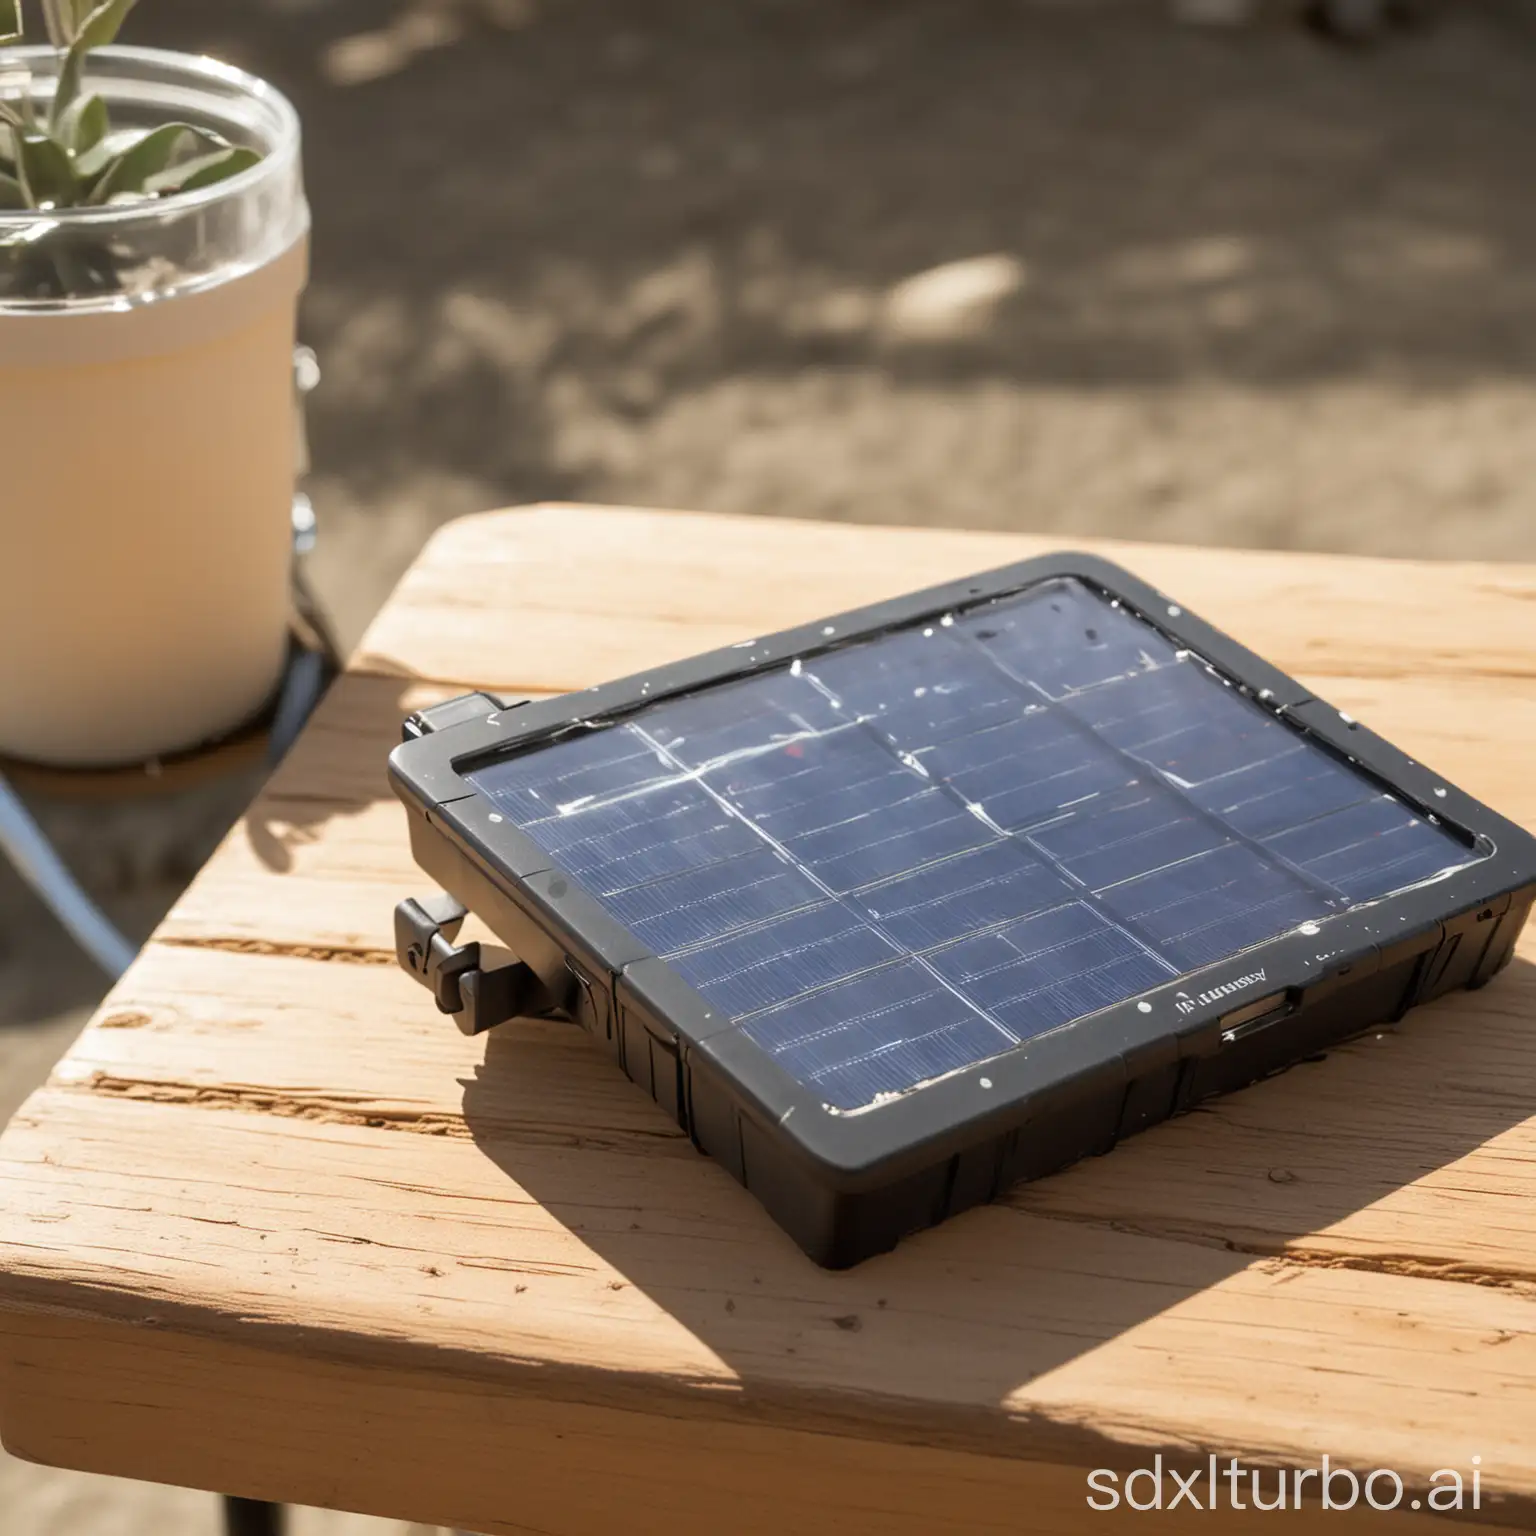 A close-up of the PVBuddy device, showing its sleek design and advanced technology. The device is sitting on a table, with a solar panel in the background.